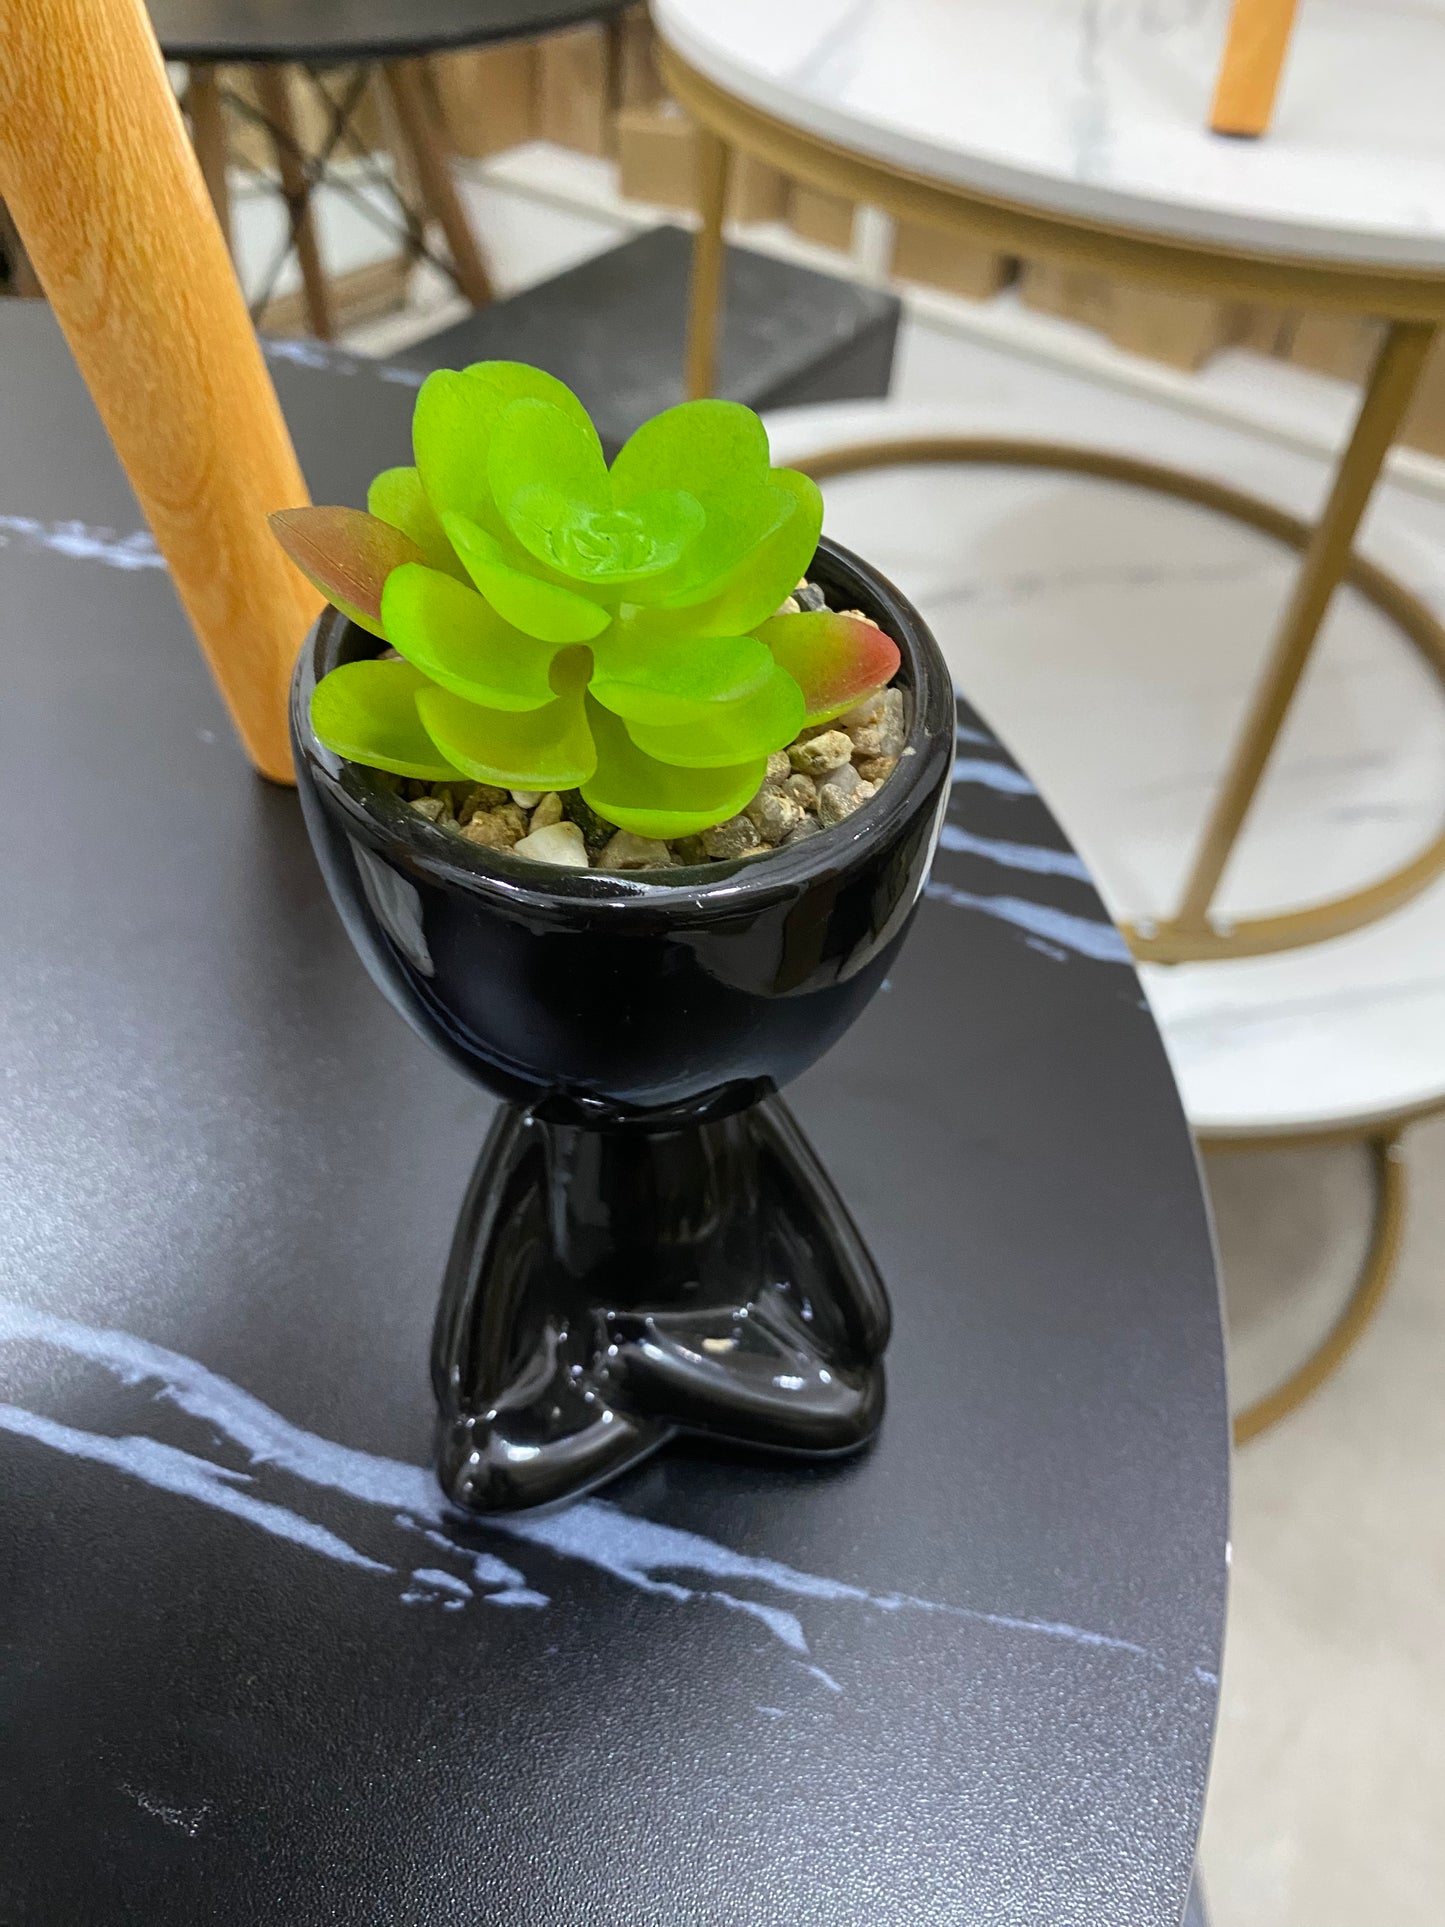 Table plant